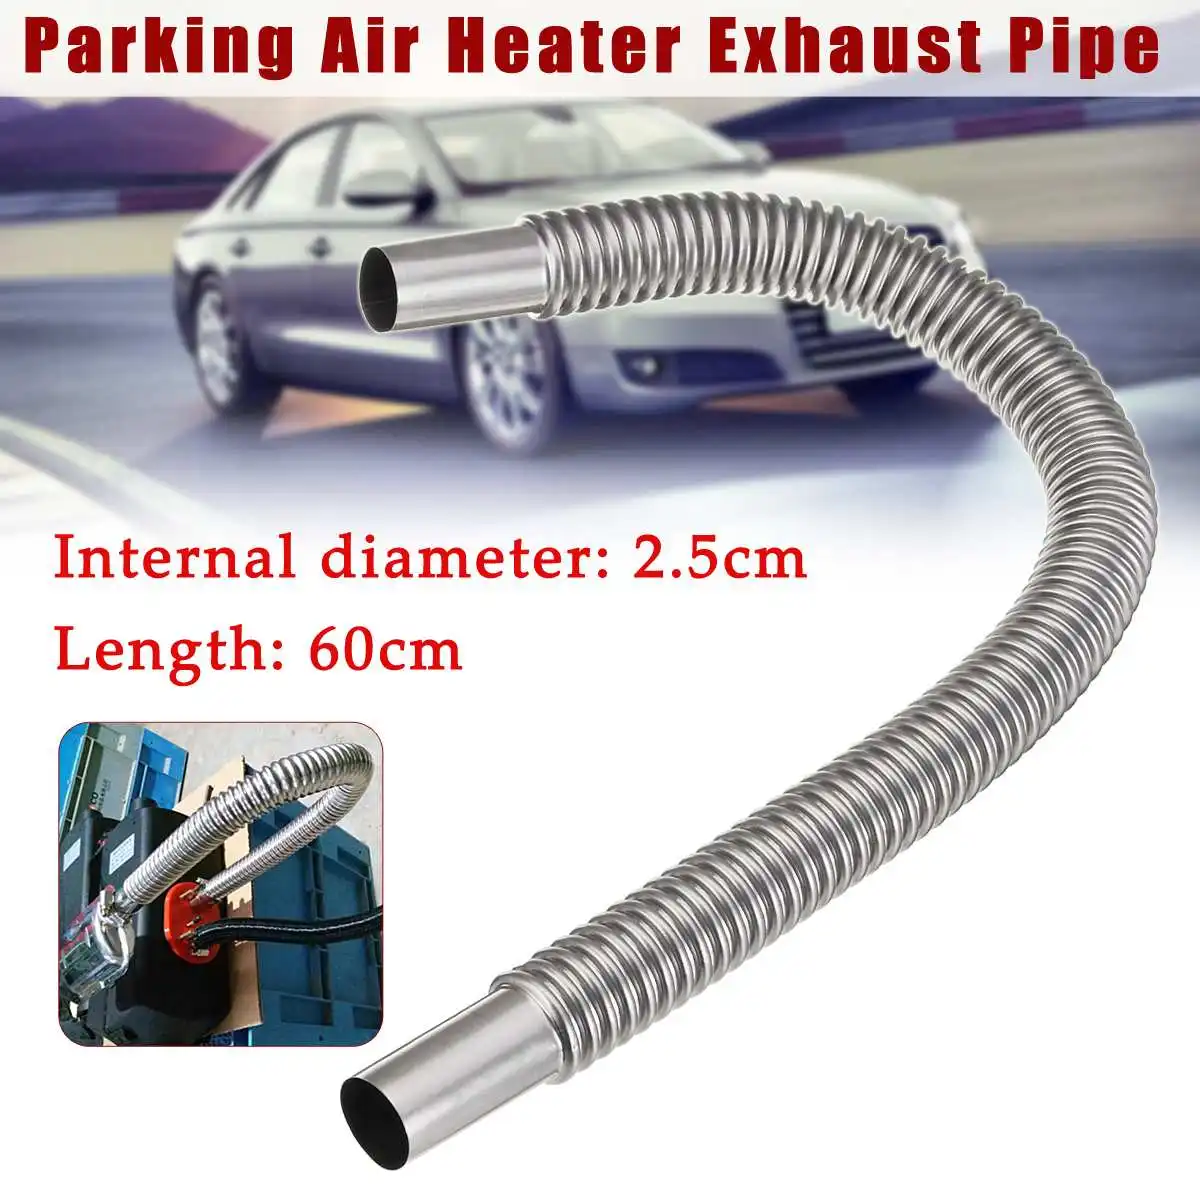 Color : Silver YanHui-LZC Heater Exhaust Pipe 60cm Air Parking Heater Stainless Steel Exhaust Pipe Tube Gas Vent Fit For Air Diesels Parking Heaters Car Accessories Auto parts 